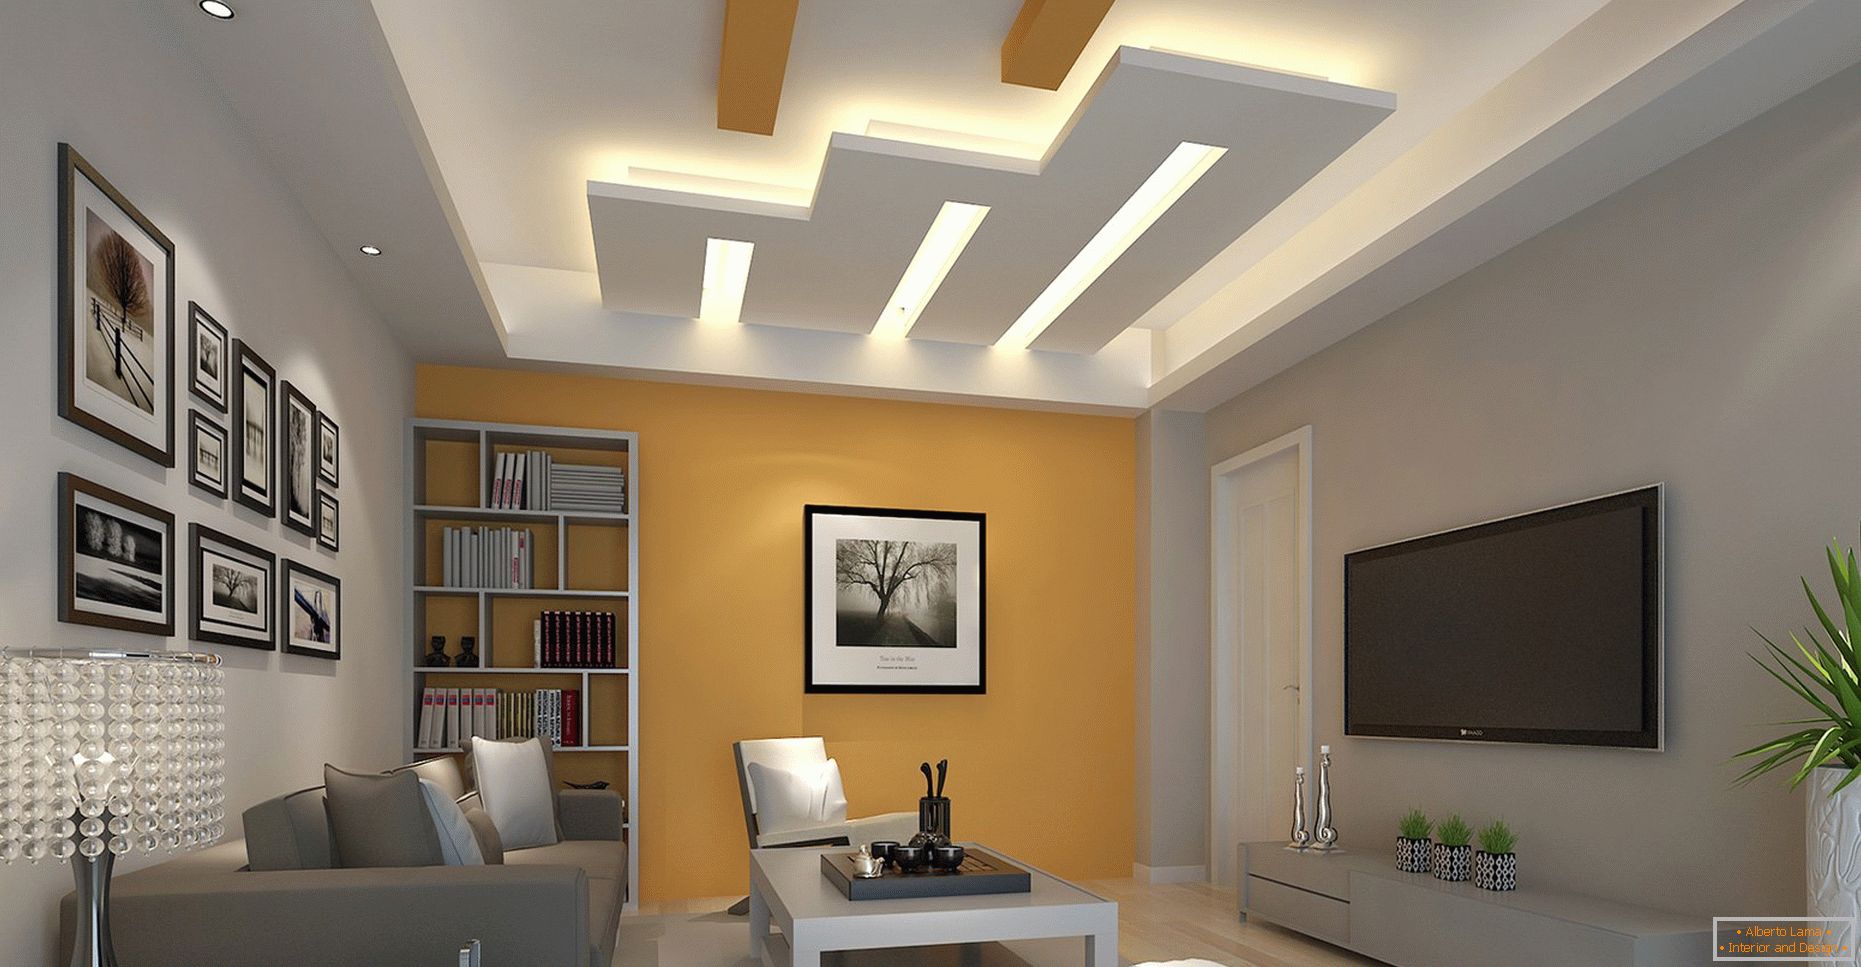 Geometric figures in the ceiling design with illumination